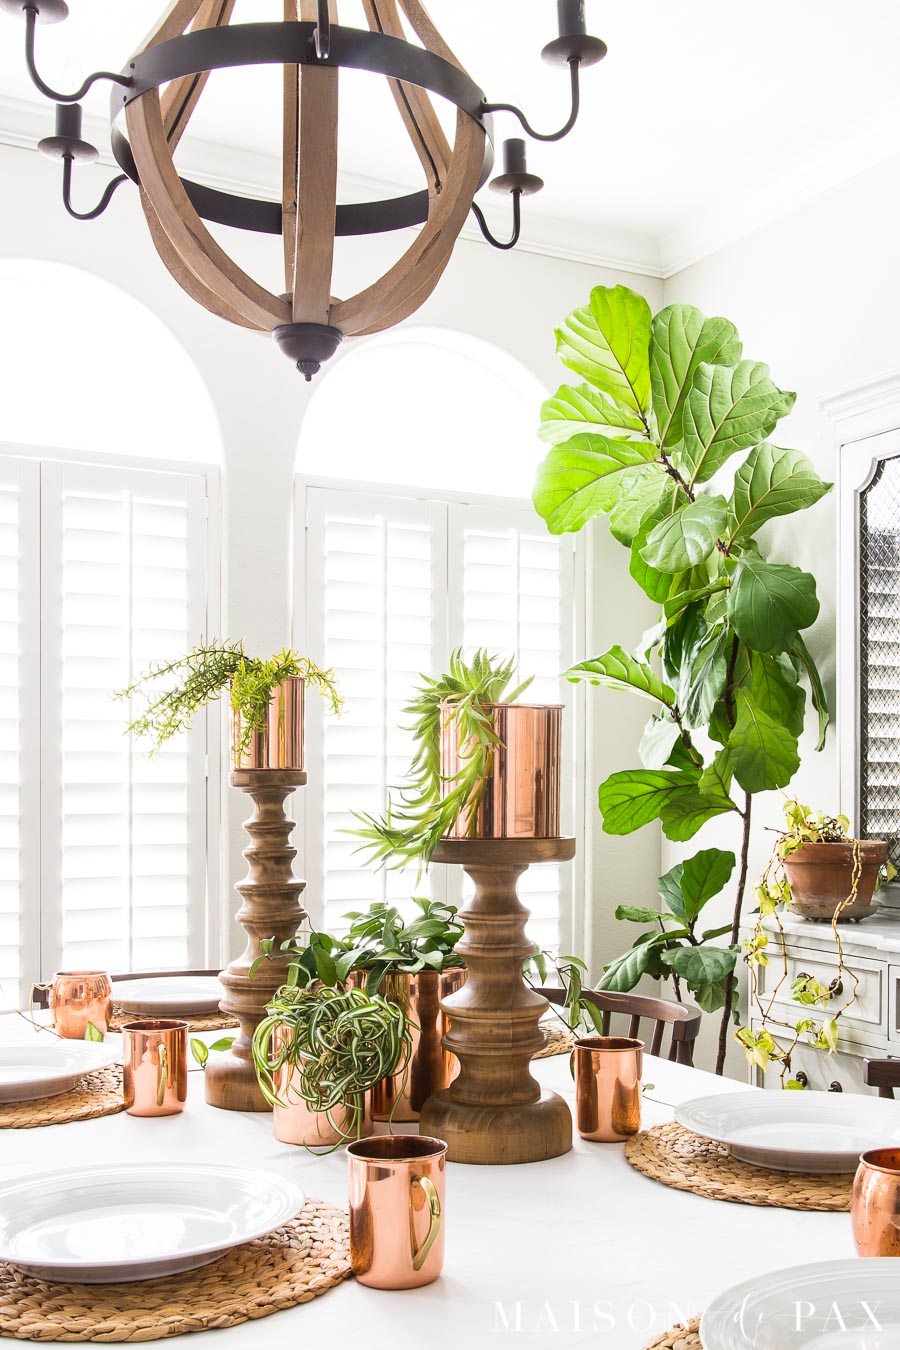 fiddle leaf fig and other plants decorating dining room | Maison de Pax